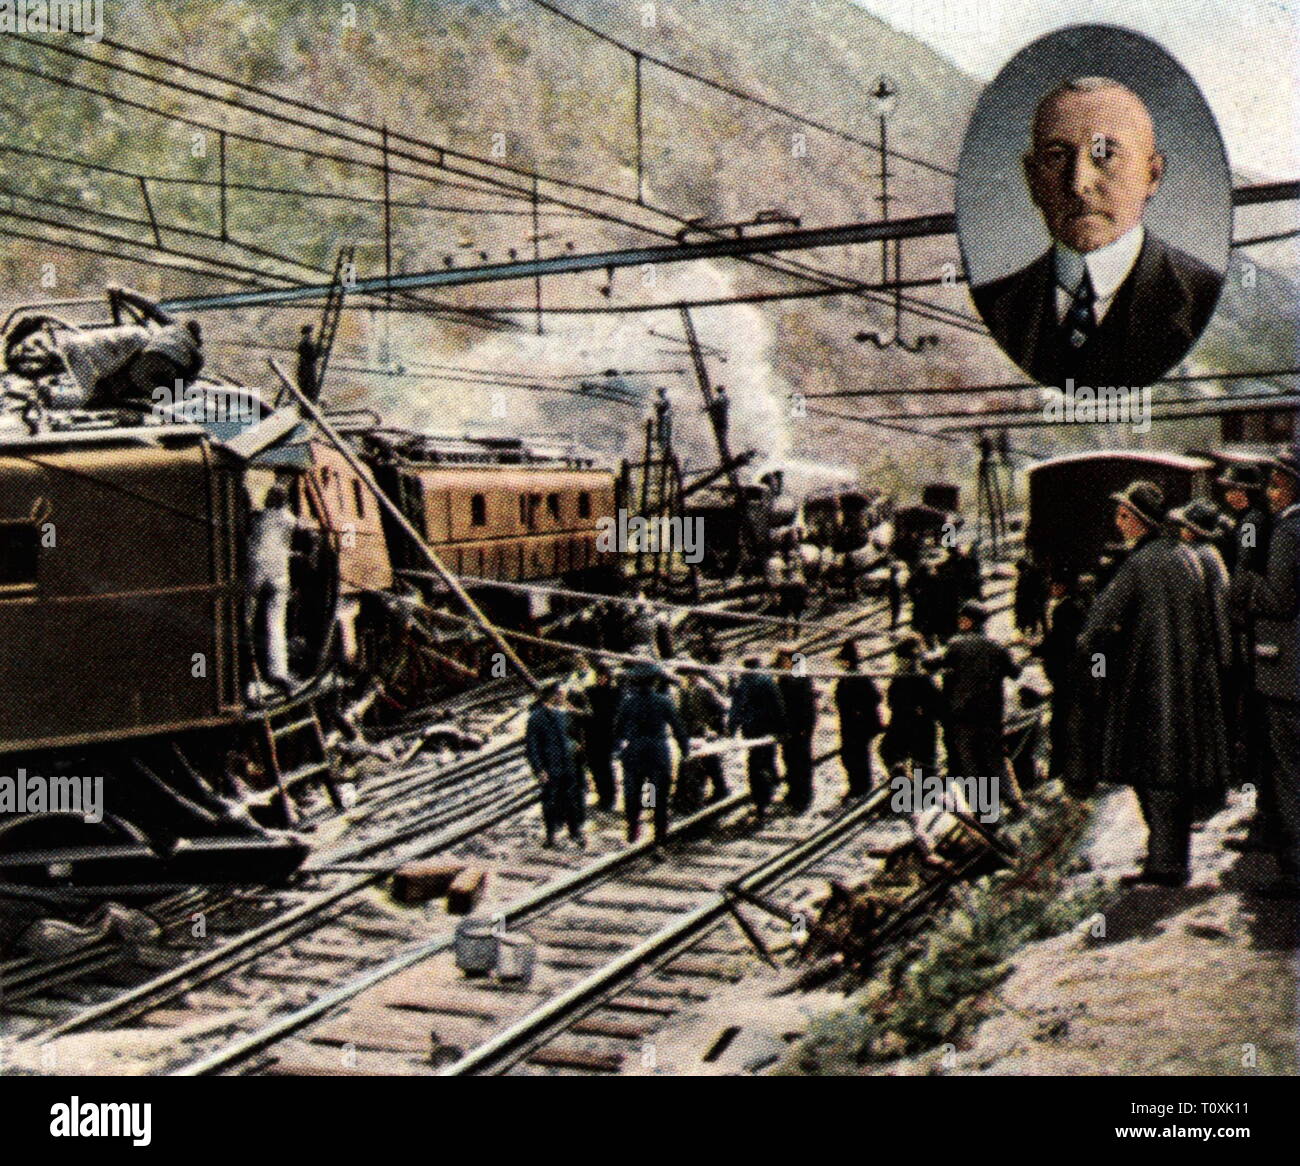 transport / transportation, railway, disasters, railway accident of Bellinzona, death of Karl Helfferich, 23.4.1924, coloured photograph, cigarette card, series 'Die Nachkriegszeit', 1935, portrait, railway accident, railway accidents, accident, accidents, collision, collisions, freight depot San Paolo, Canton of Ticino, Switzerland, people, 1920s, 20th century, transport, transportation, railway, railroad, railways, railroads, disaster, disasters, coloured, colored, post war period, post-war period, post-war years, post-war era, historic, histor, Additional-Rights-Clearance-Info-Not-Available Stock Photo